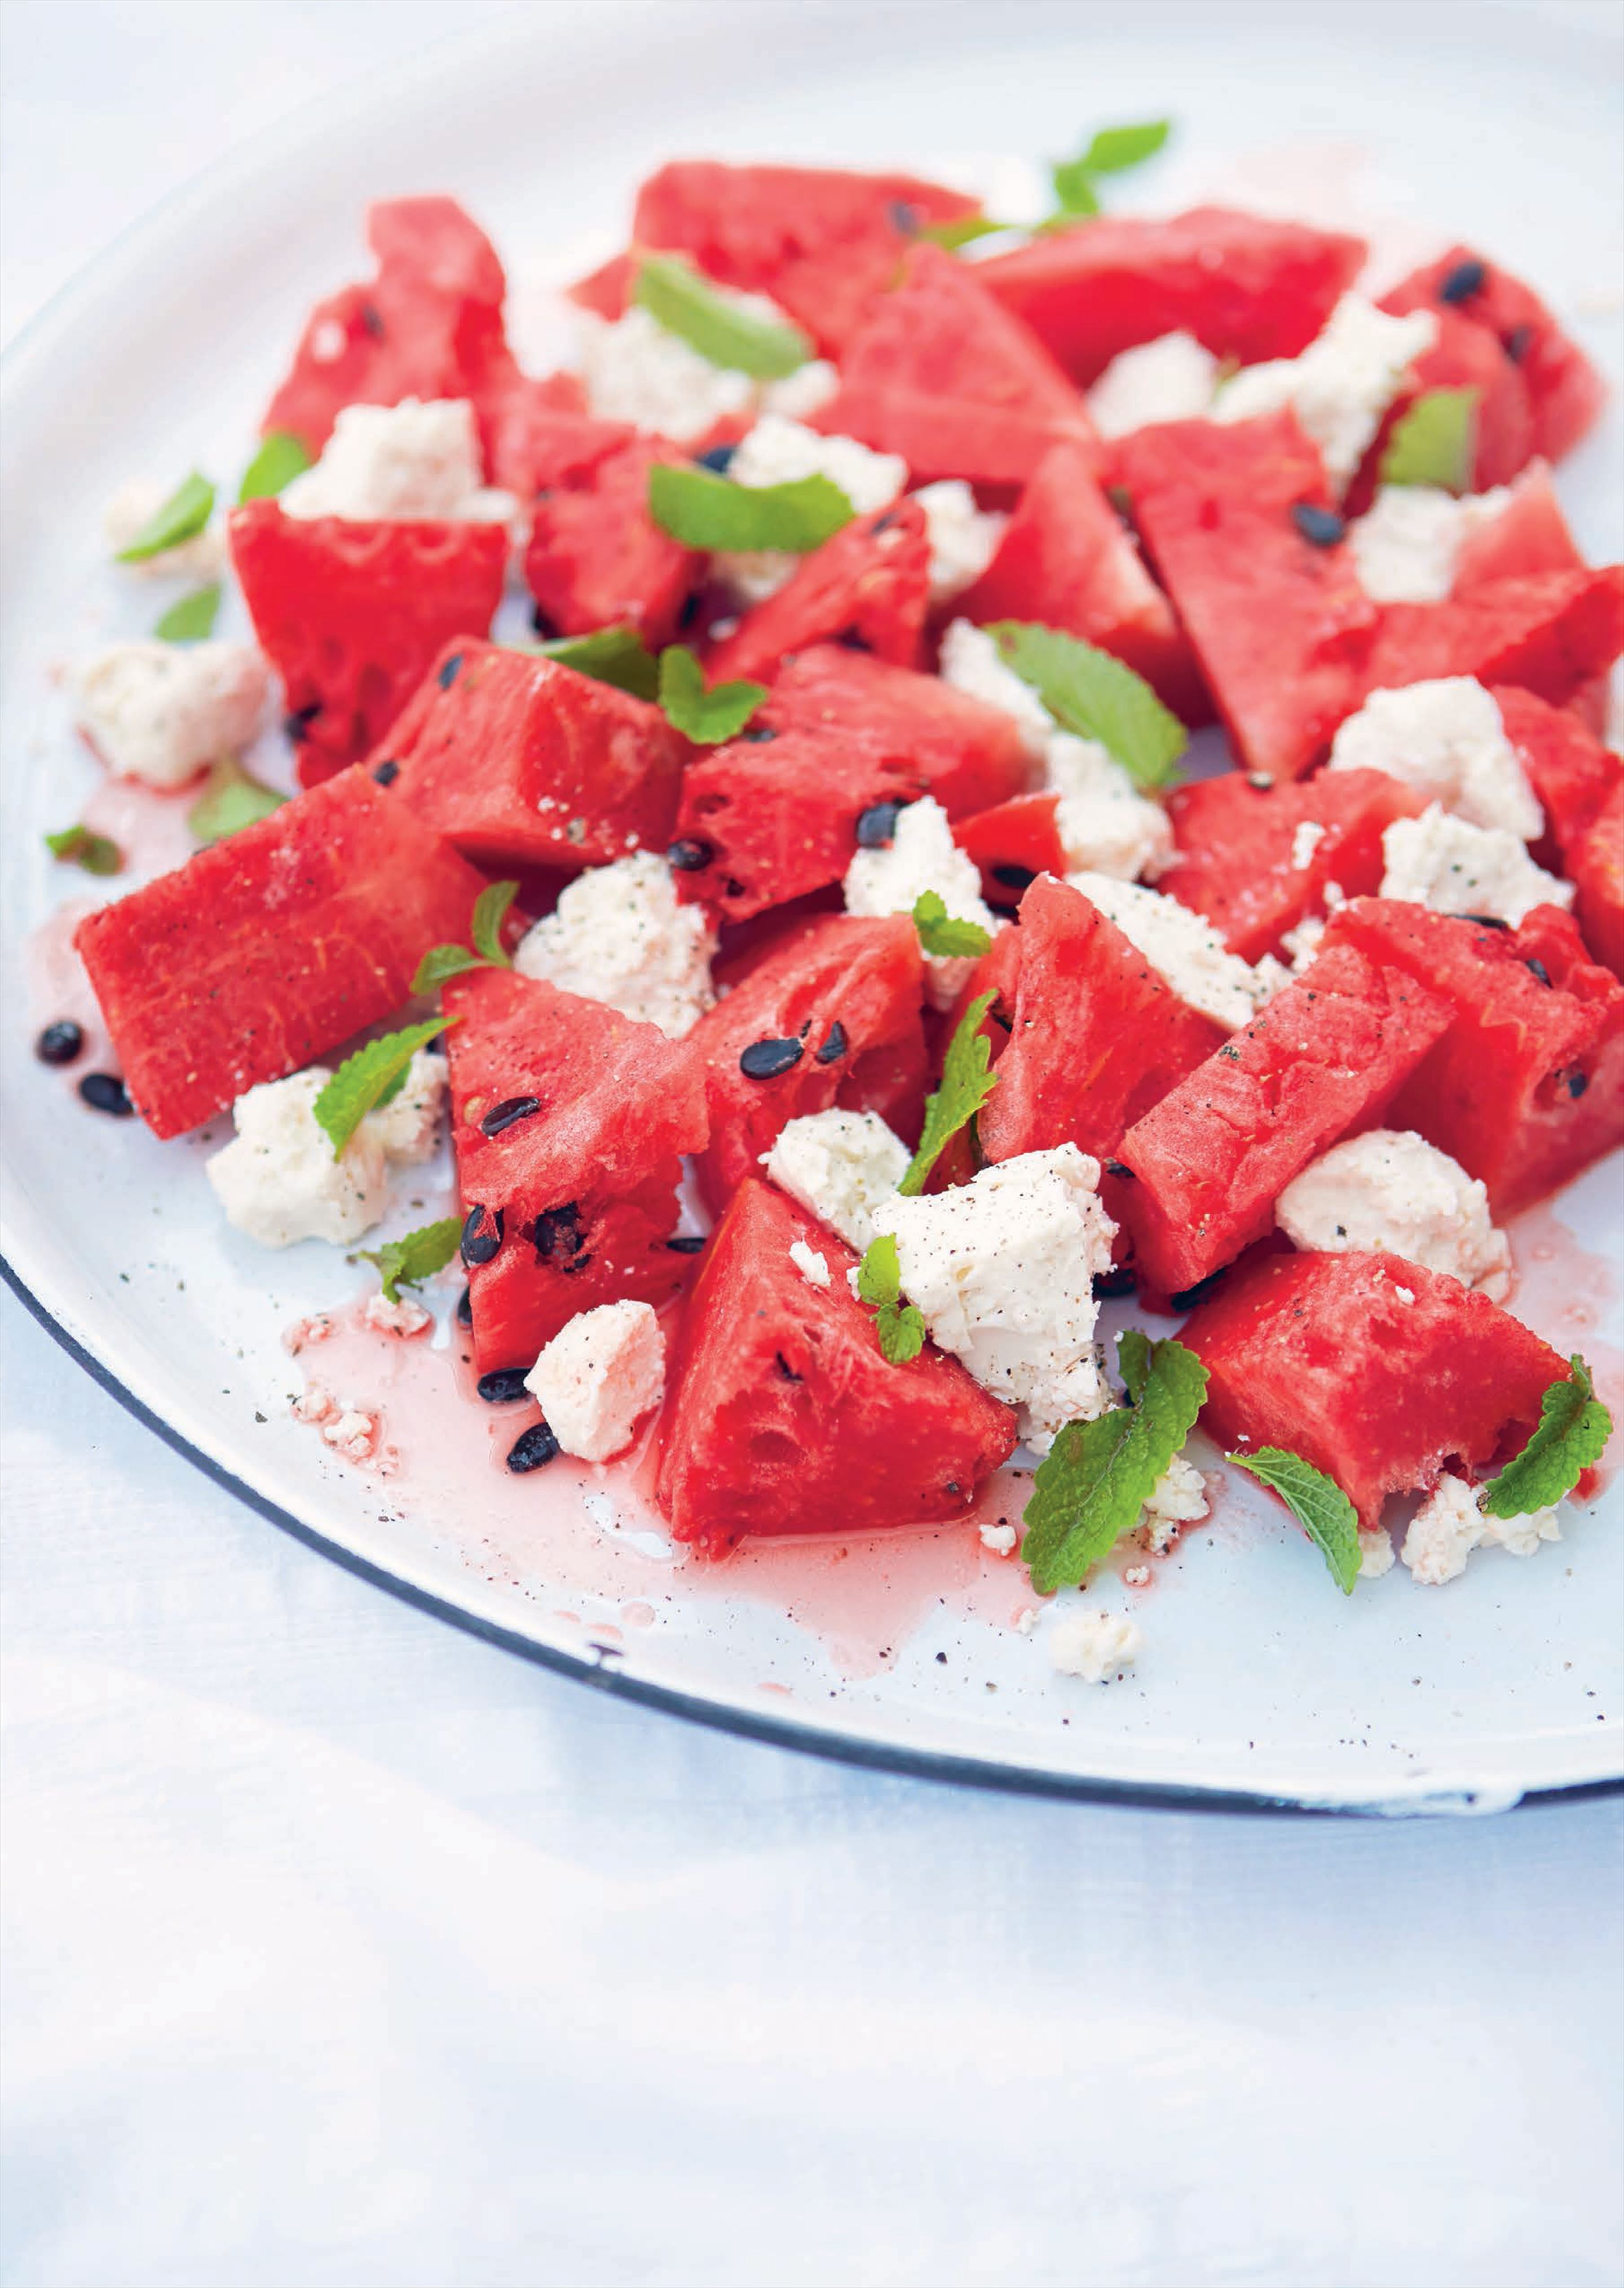 Watermelon with white cheese